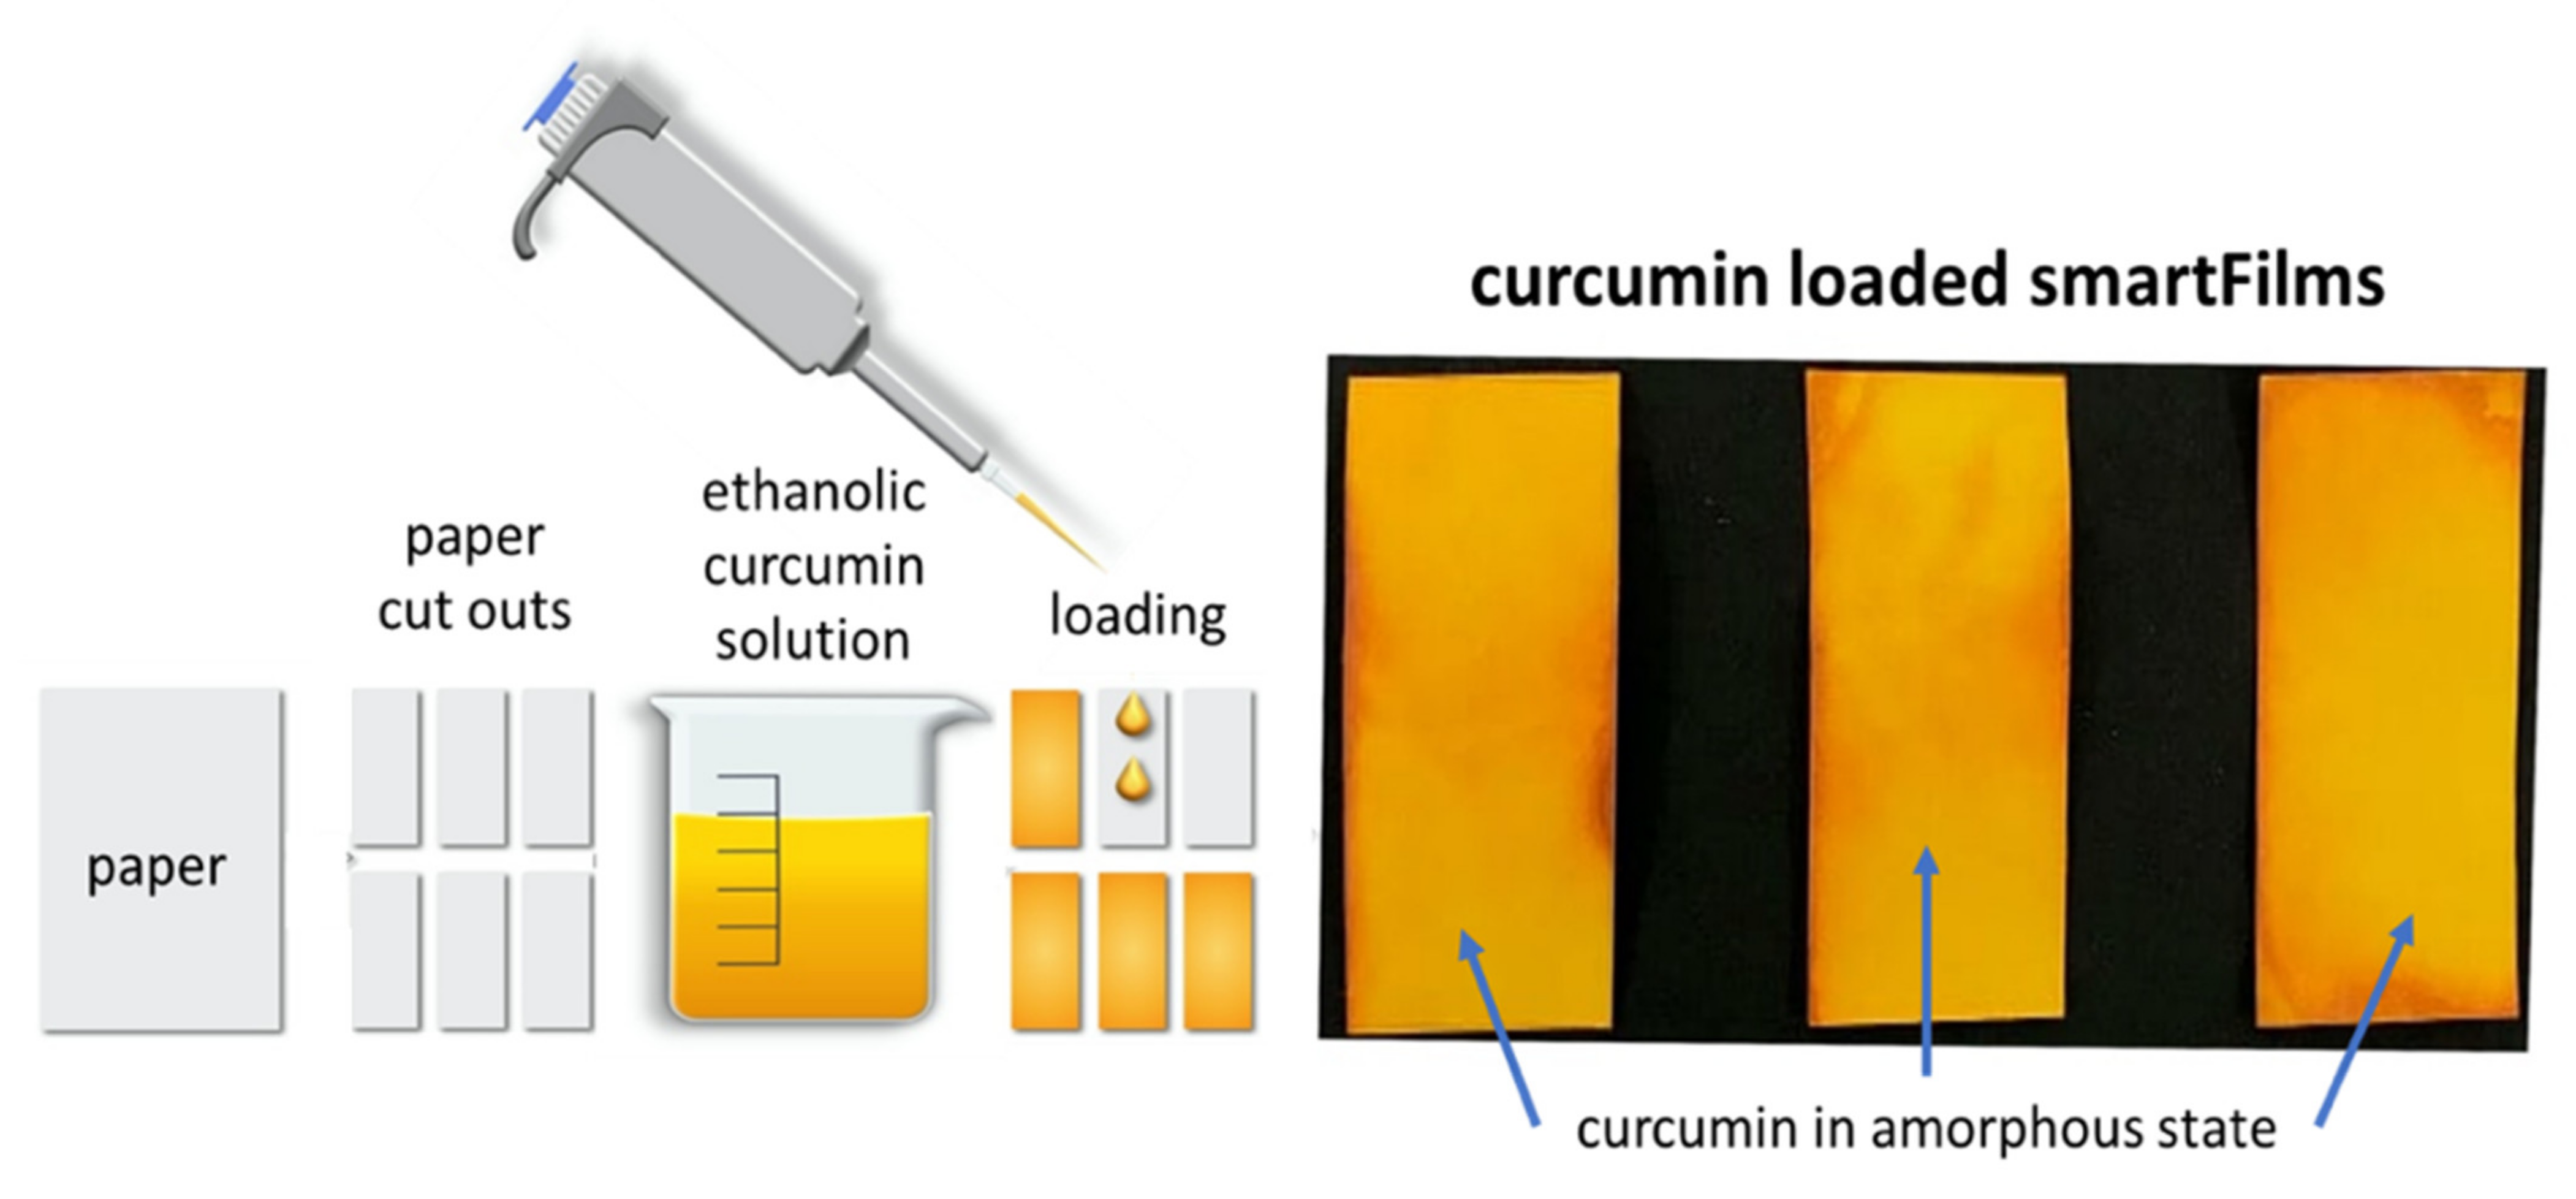 Molecules | Free Full-Text | Improved Dermal and Transdermal Delivery of  Curcumin with SmartFilms and Nanocrystals | HTML